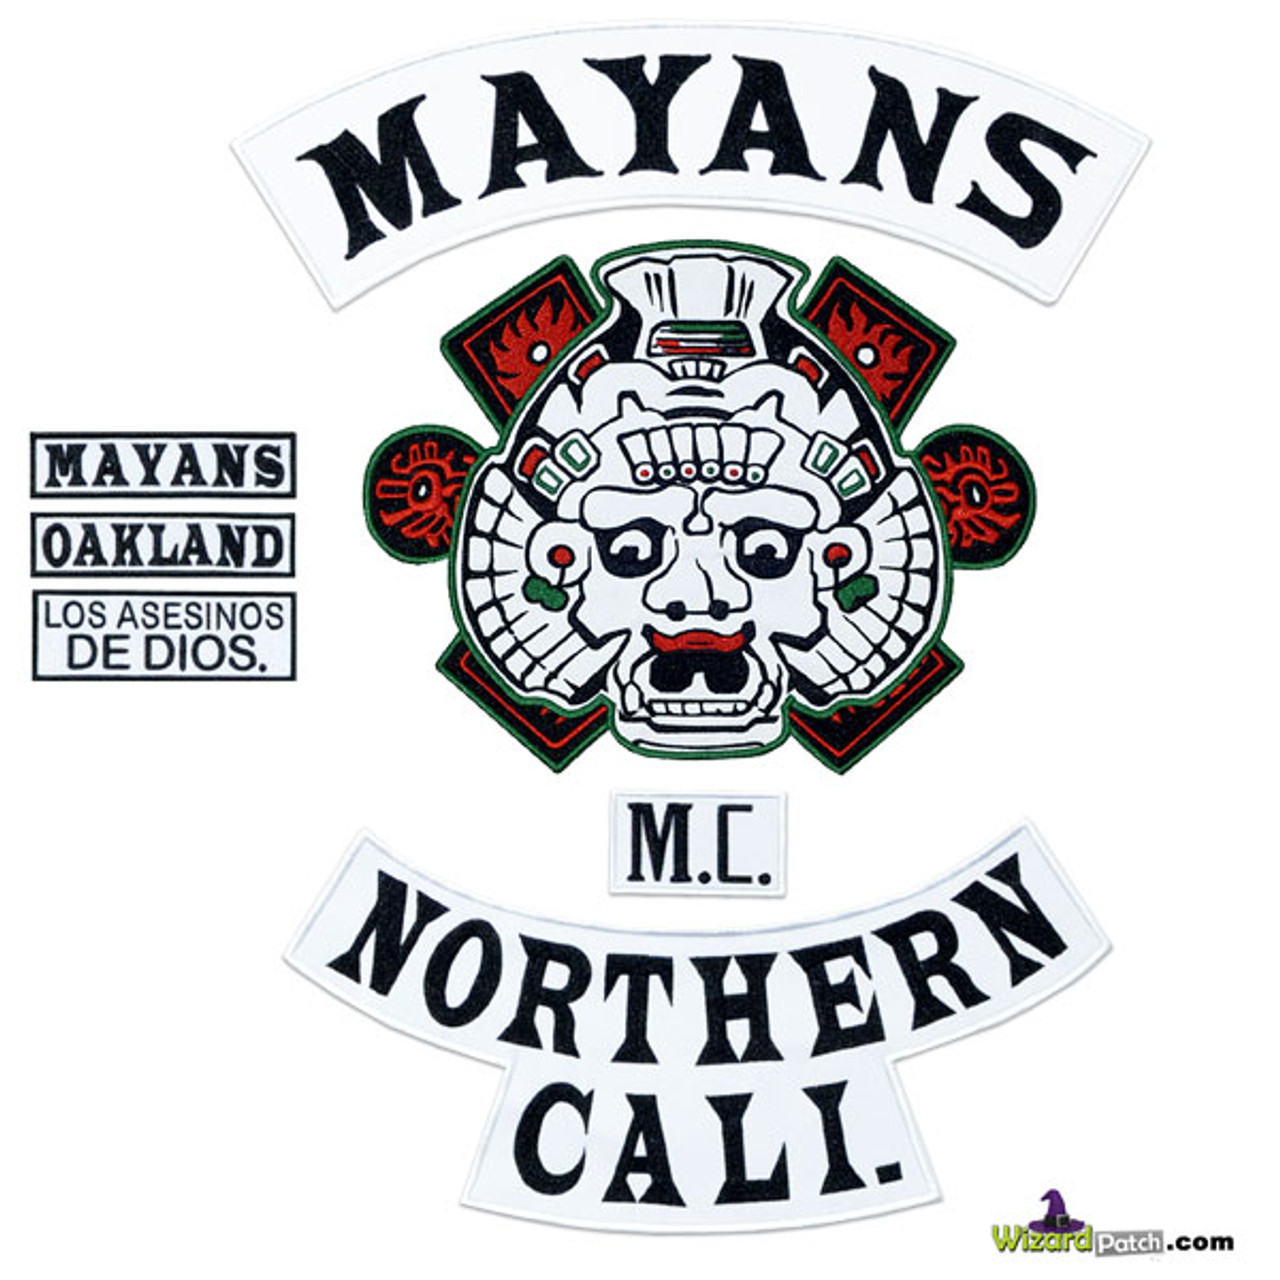 MAYANS MC FULL BACK EMBROIDERED PATCH SET 7 PIECE